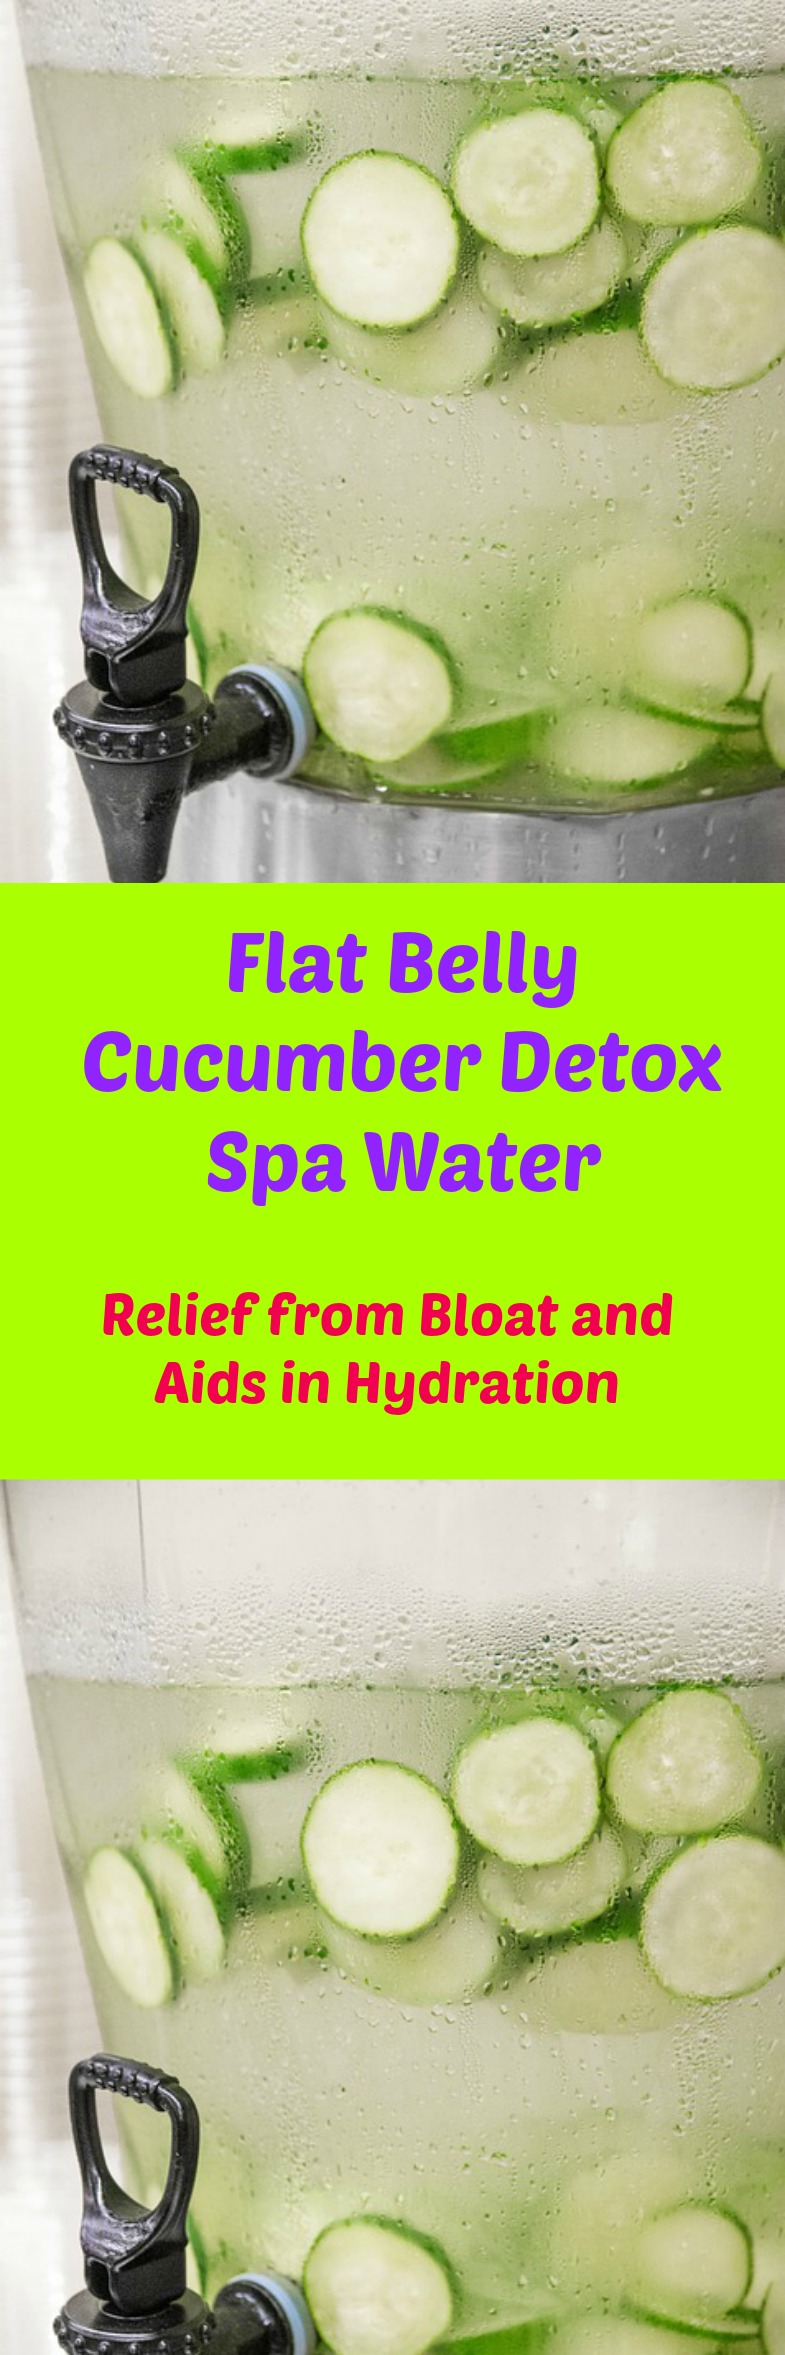 How to relieve bloating with Flat Belly Cucumber and Ginger Spa Water. Cleanse and lose weight with this fat burning recipe to cleanse your liver and achieve a flat belly.